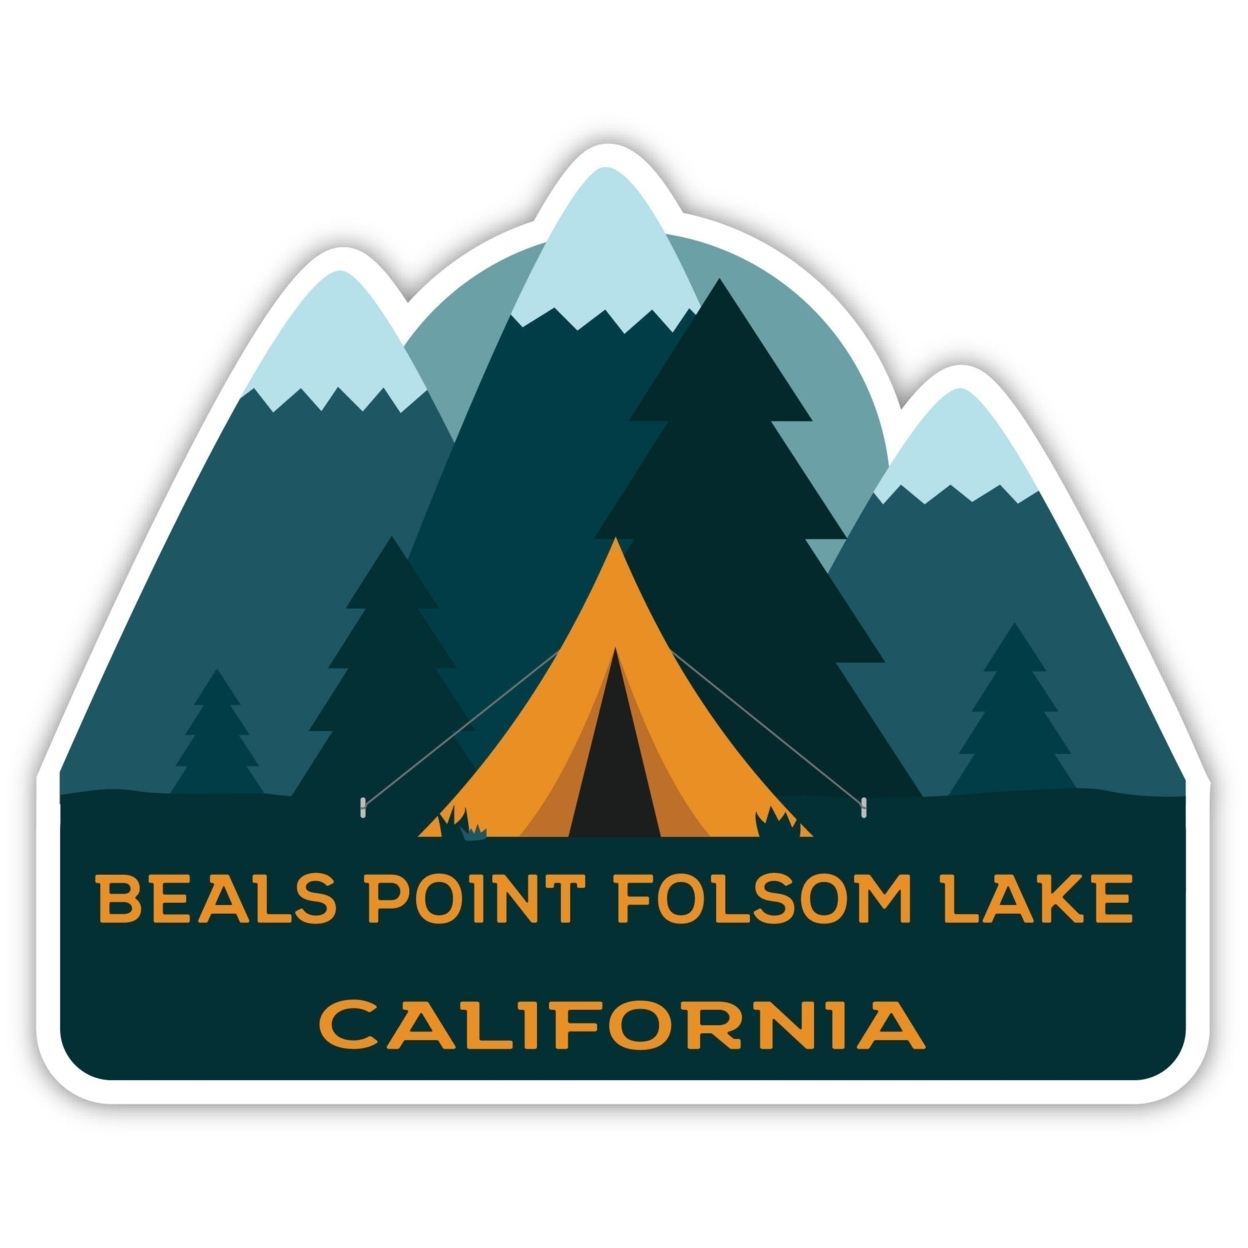 Beals Point Folsom Lake California Souvenir Decorative Stickers (Choose Theme And Size) - 4-Pack, 12-Inch, Bear